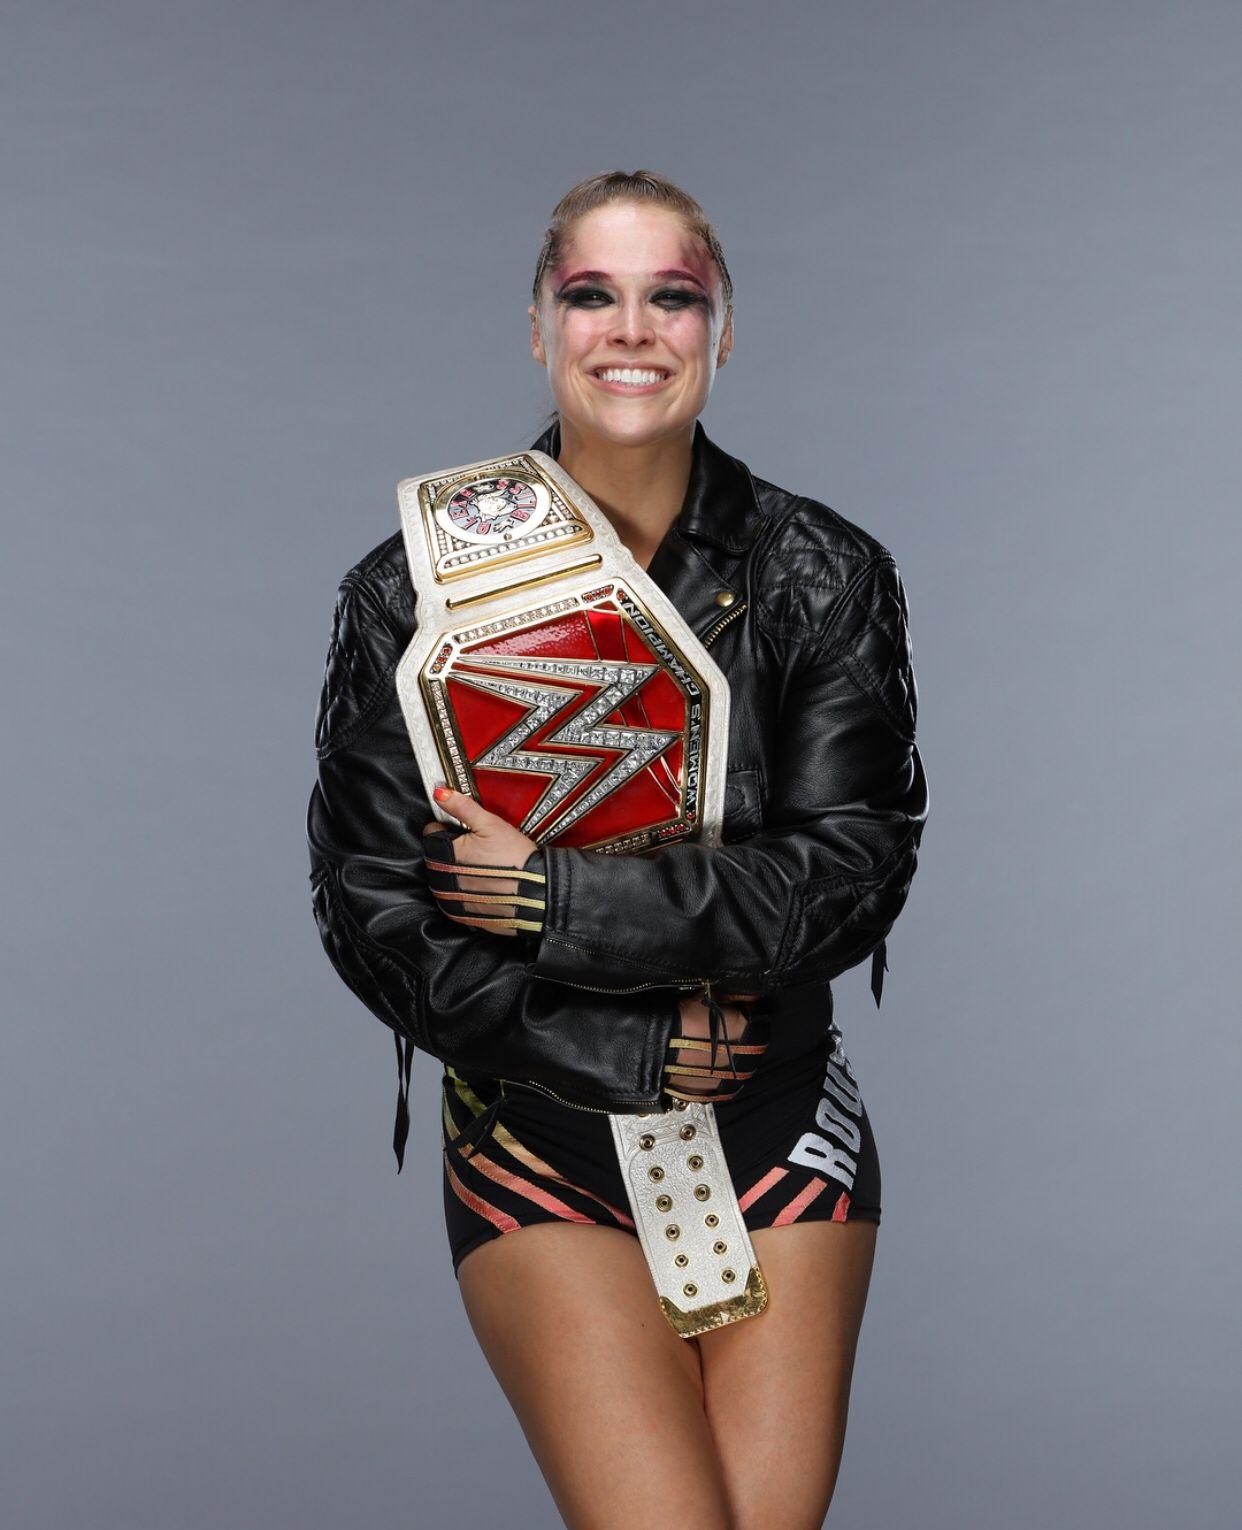 In my opinion Ronda is the best Raw Women's Champion. WWE. Ronda